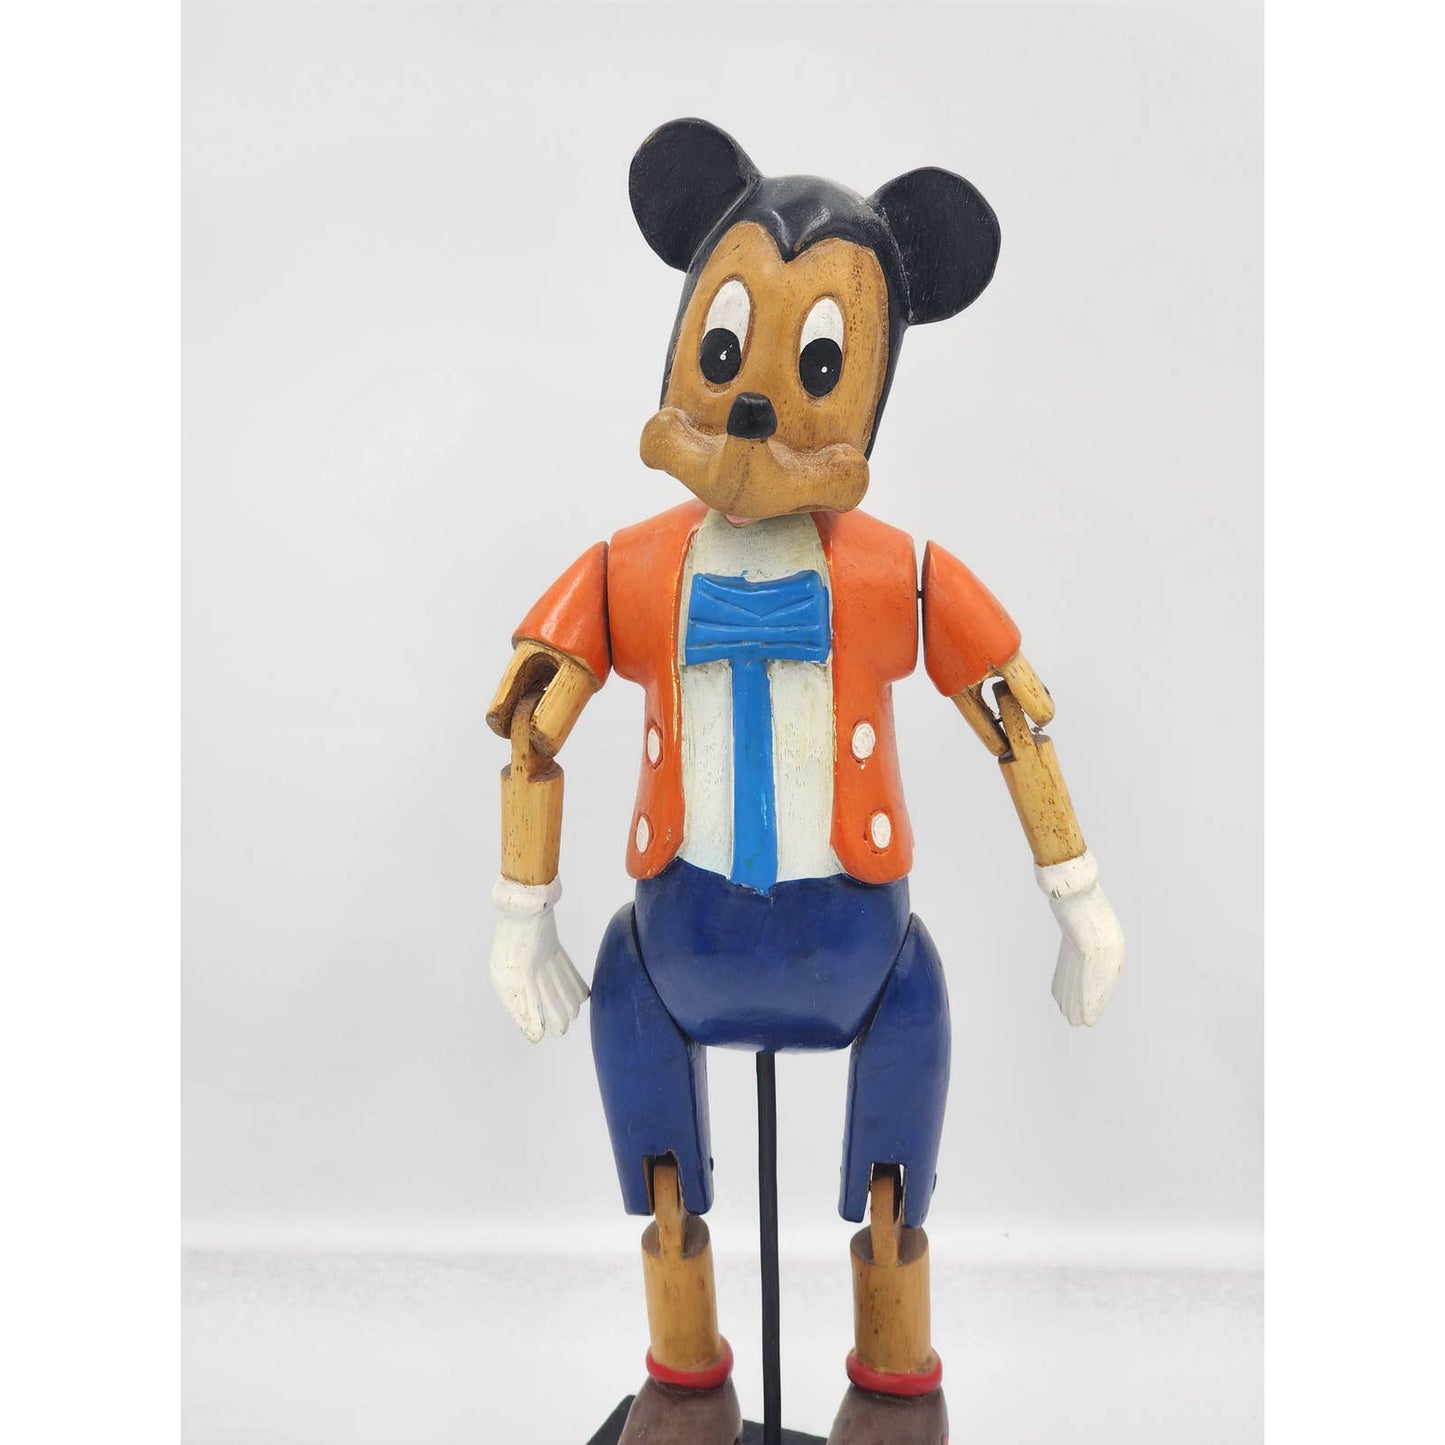 Rare Disney Mickey Mouse Marionette Puppet On Stand Vintage Collectible Wood 17"